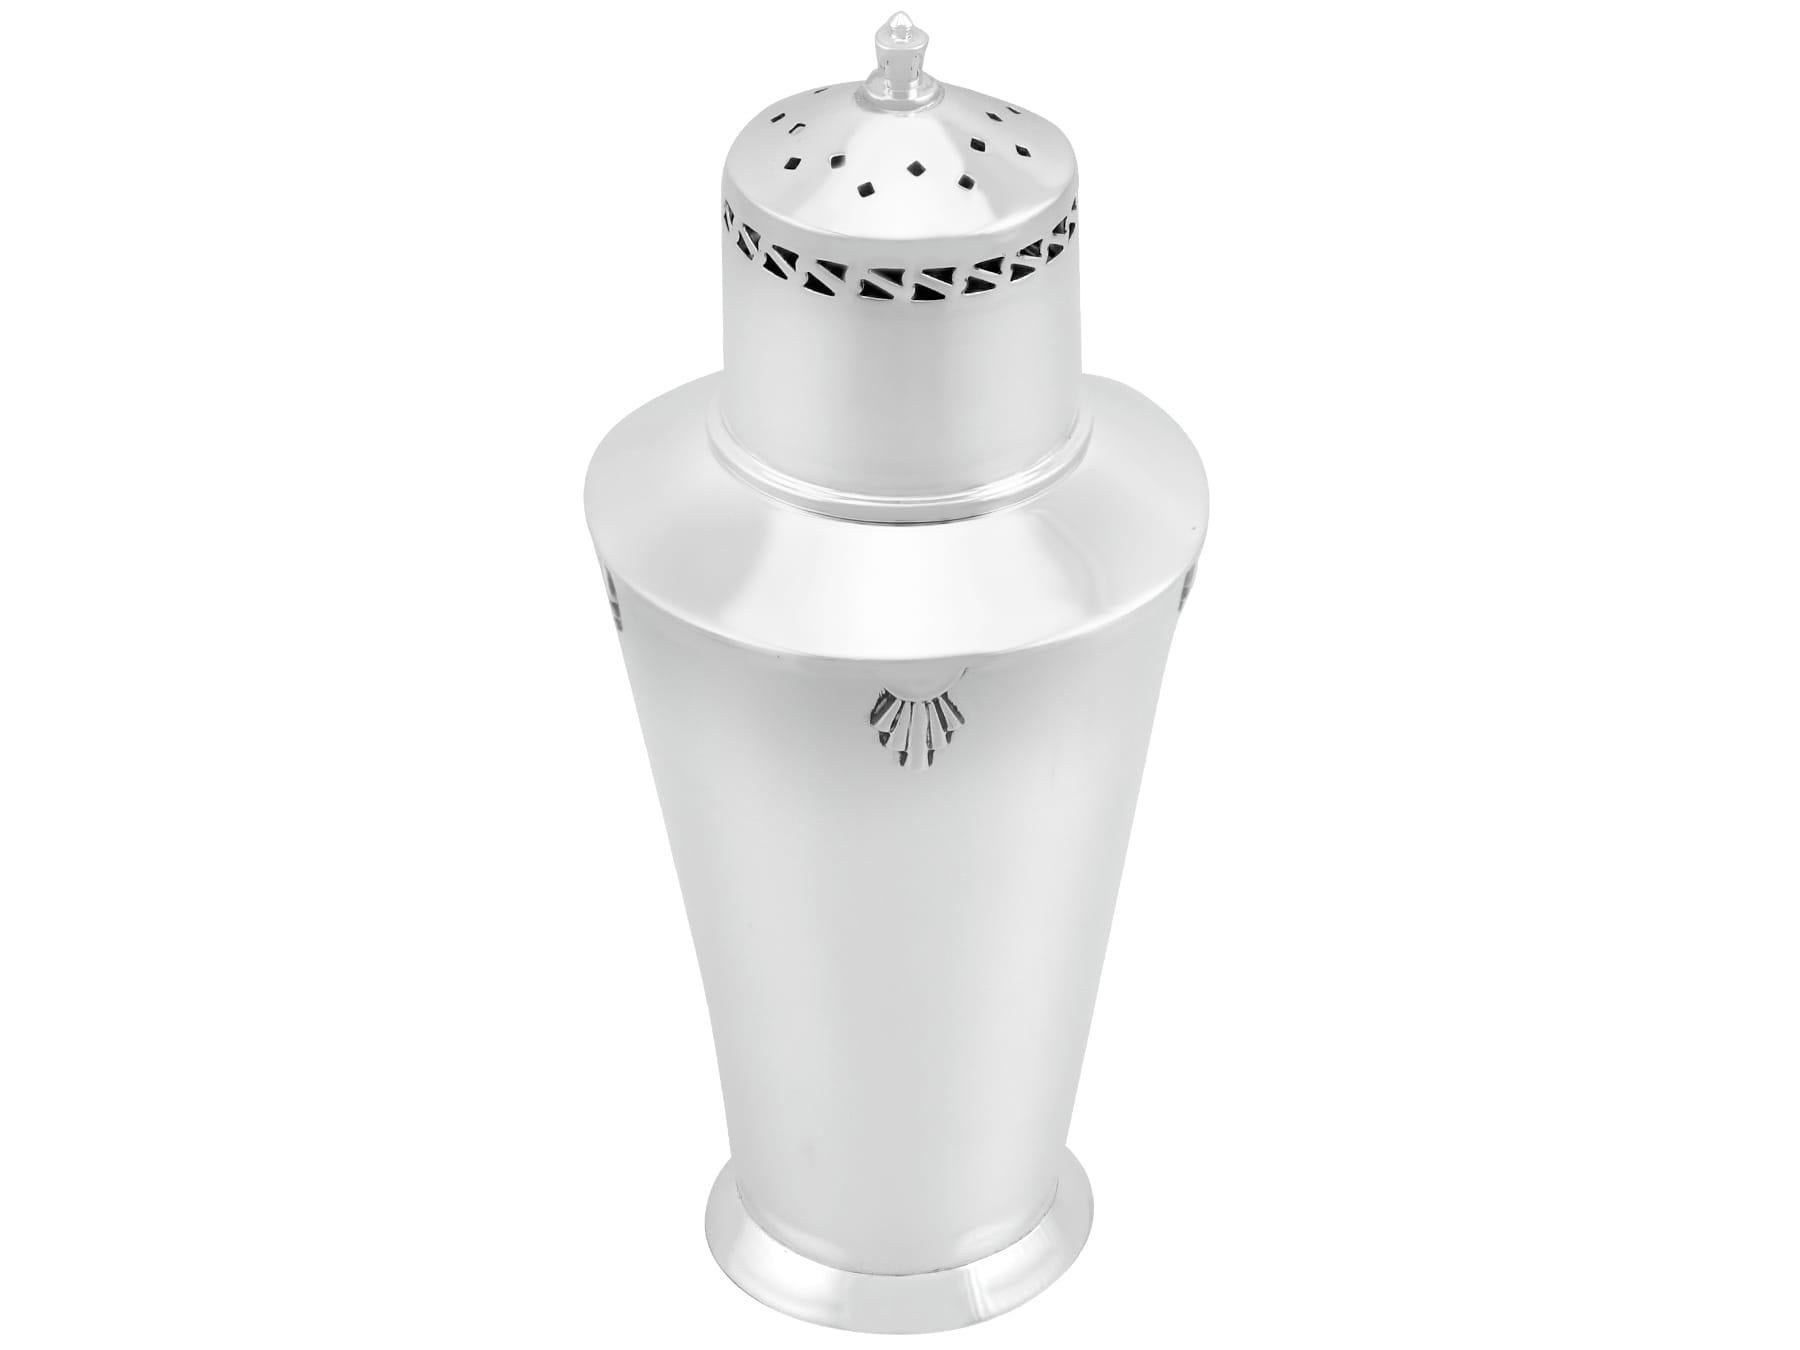 An exceptional, fine and impressive antique George V English sterling silver sugar caster in the Art Deco style; an addition to our silver teaware collection

This exceptional antique George V sterling silver sugar casterhas a tapering cylindrical